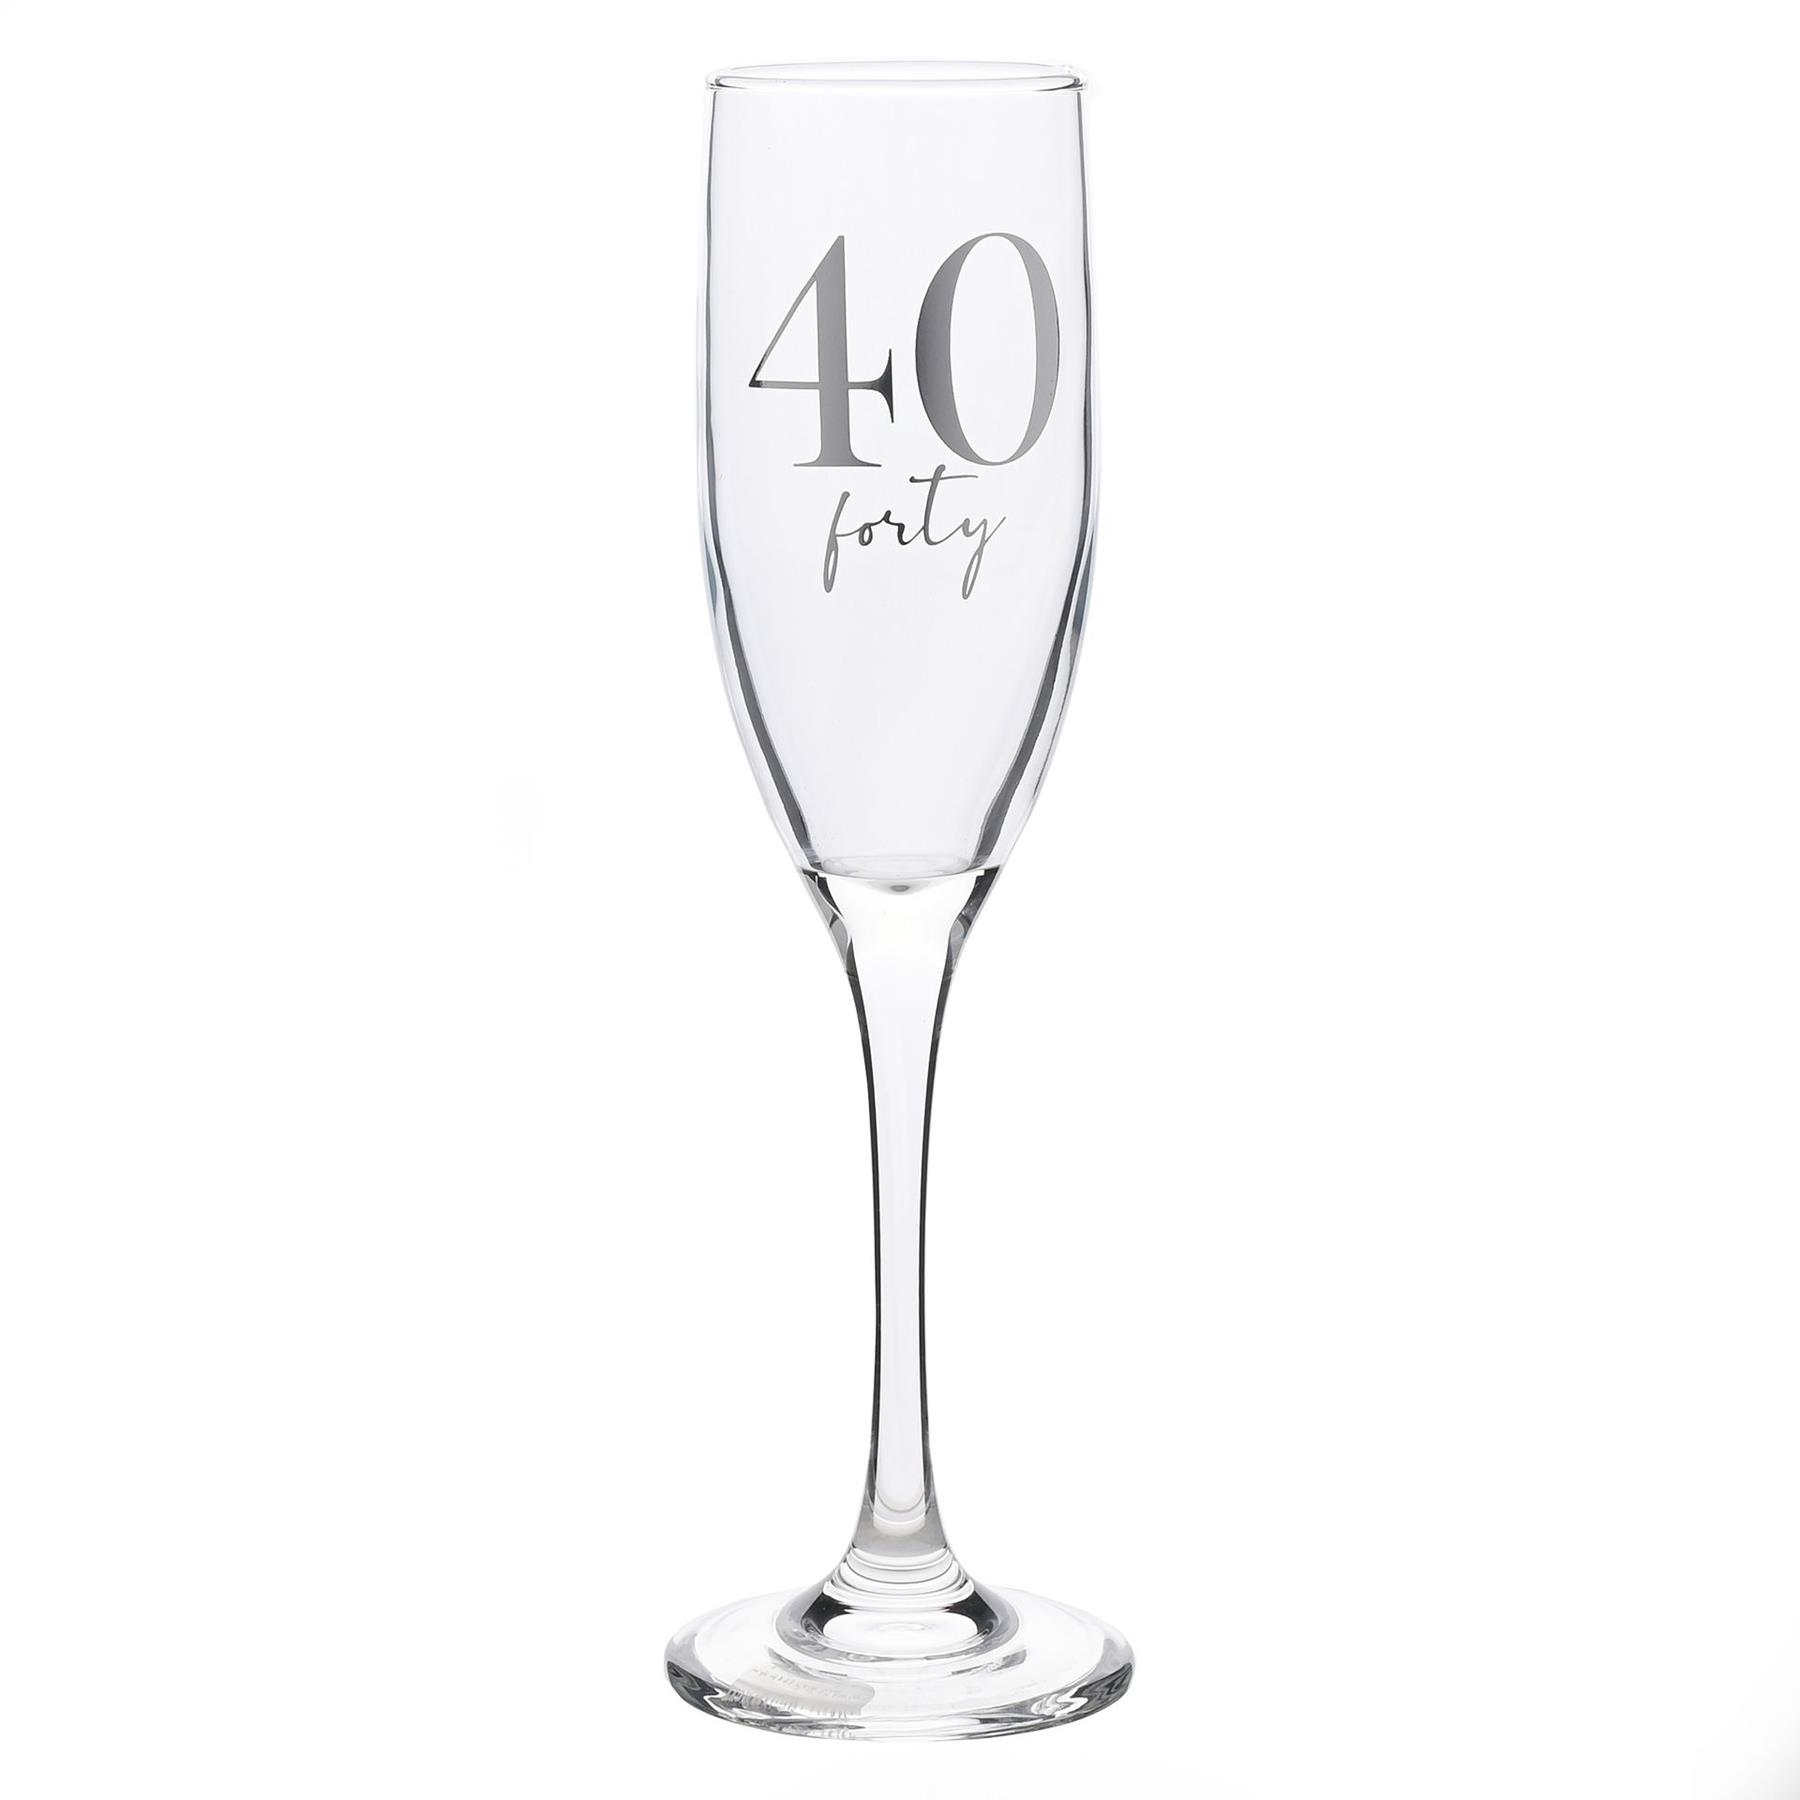 Birthday Champagne Flute Glass with Silver Detail - 40